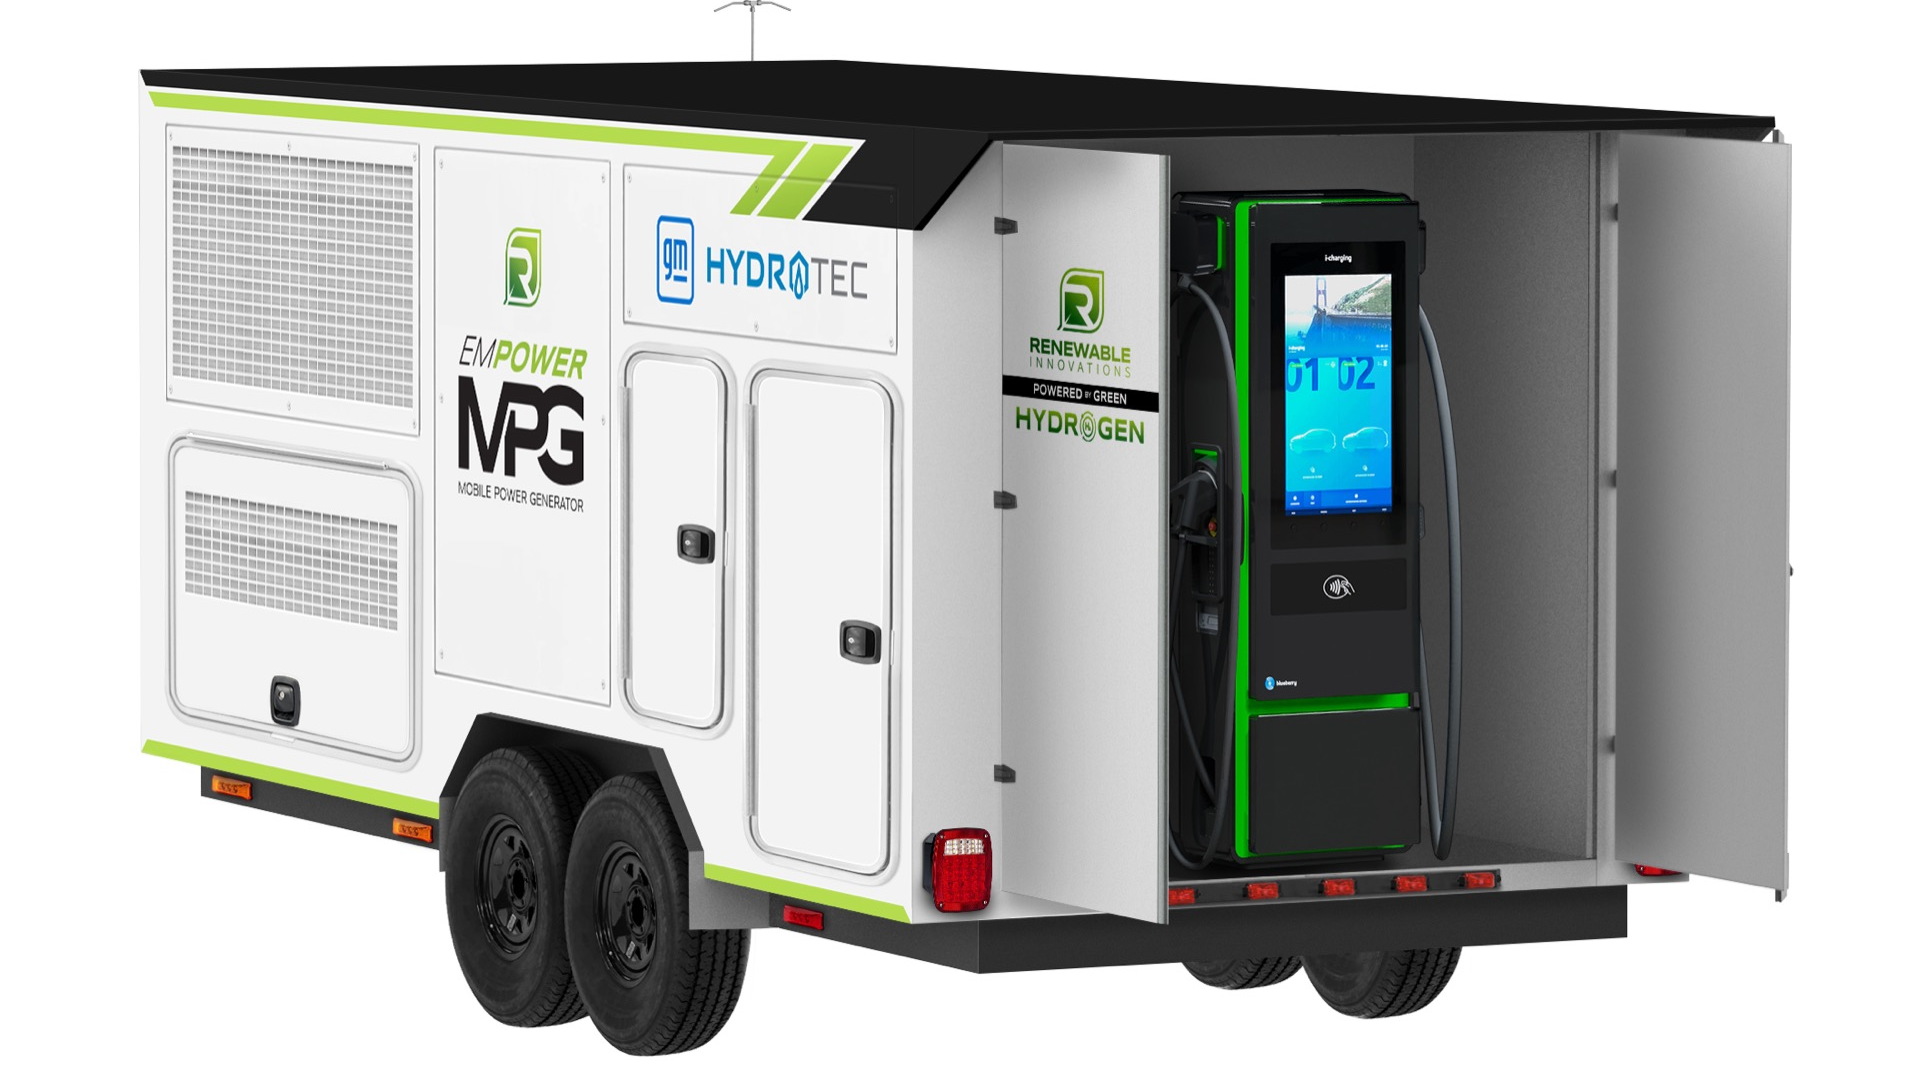 GM Hydrotec and Renewable Innovations’ Mobile Power Generator